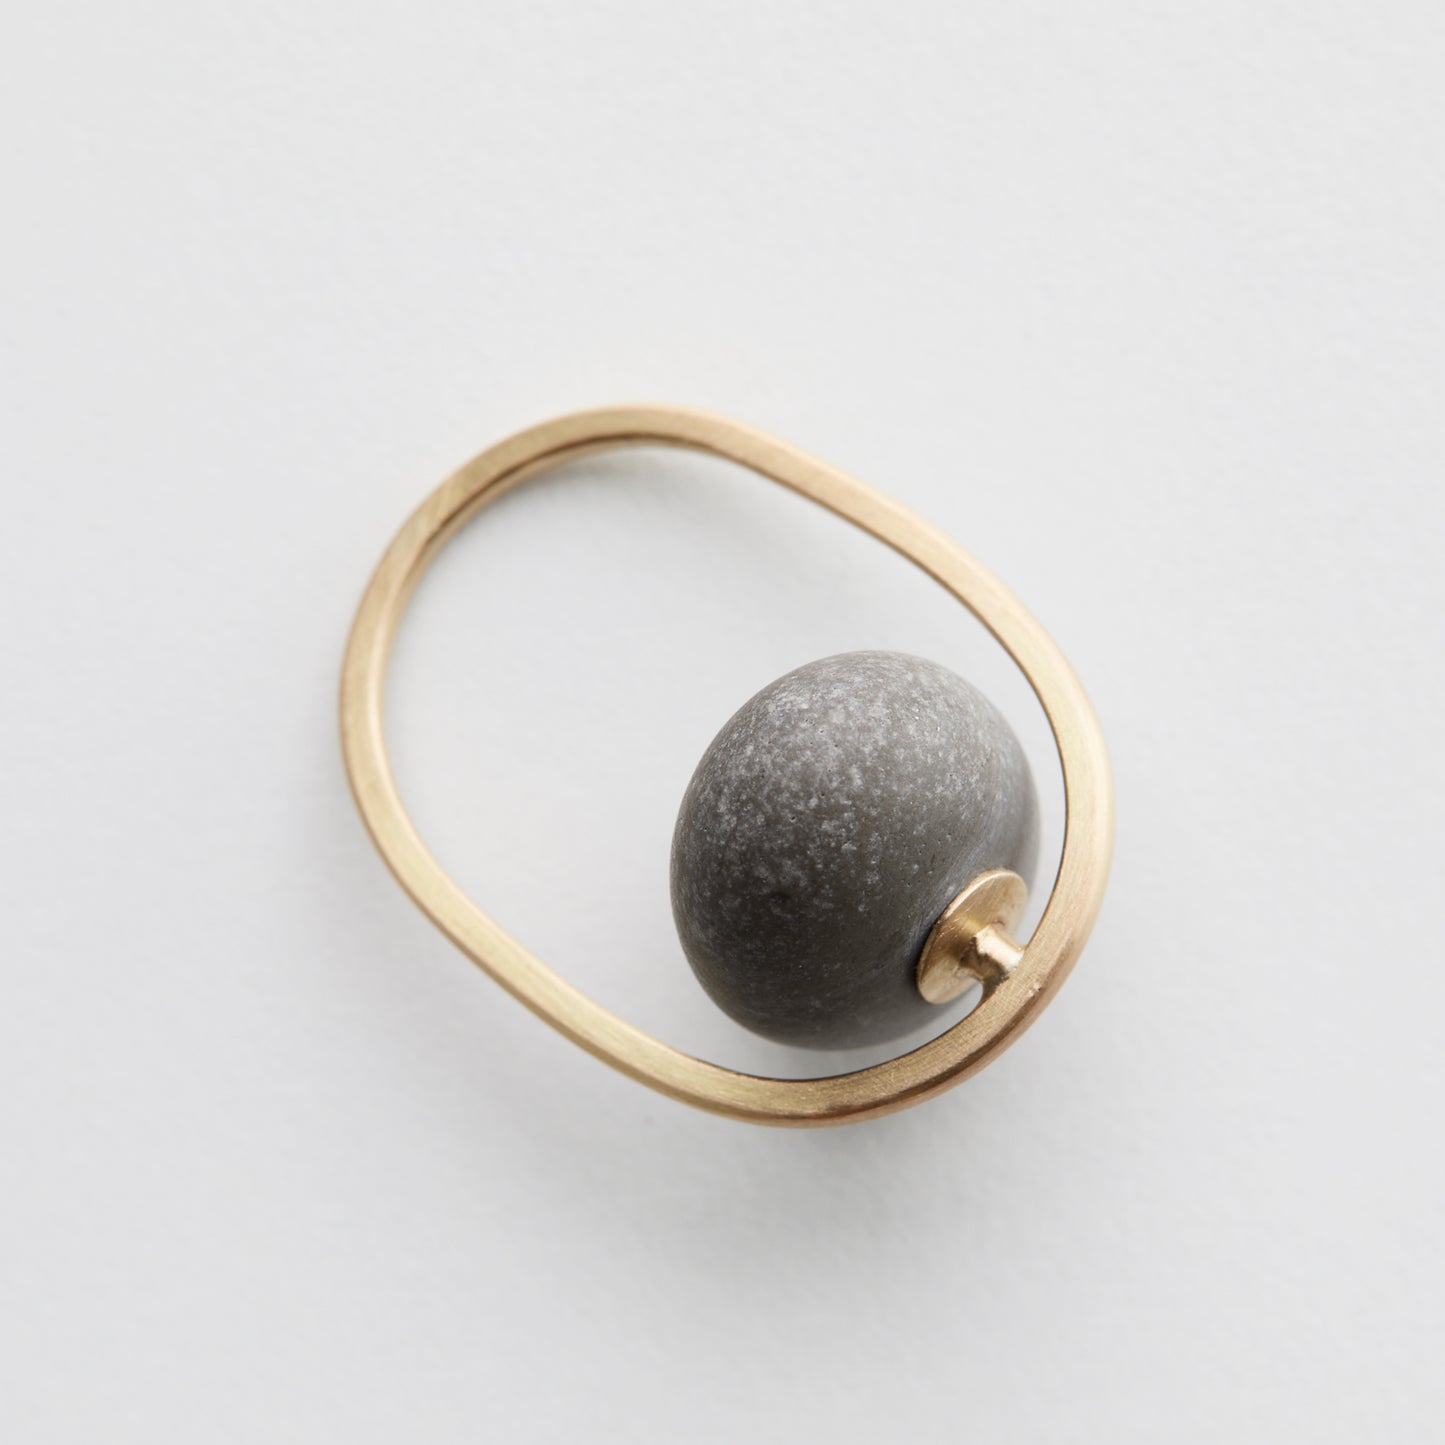 Millie Behrens, "Pebbles ring Embrace", gull